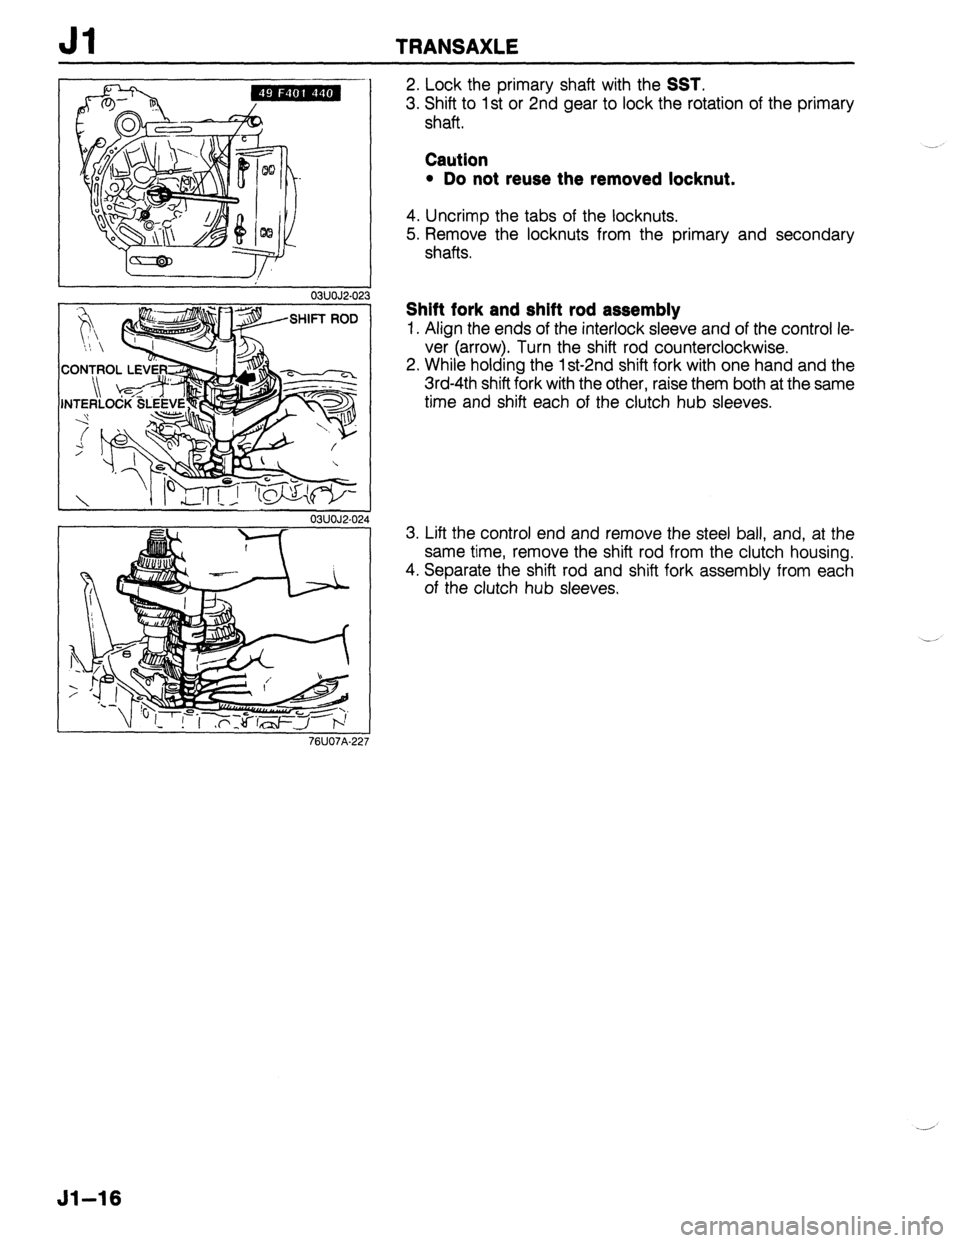 MAZDA 323 1989  Factory Repair Manual Jl TRANSAXLE 
SHIFT ROD “I, - 
CON-rPOL LEVE$:, 
I I 03UOJ2.0 
76U07A.22 
2. Lock the primary shaft with the SST. 
3. Shift to 1 st or 2nd gear to lock the rotation of the primary 
shaft. 
Caution 
